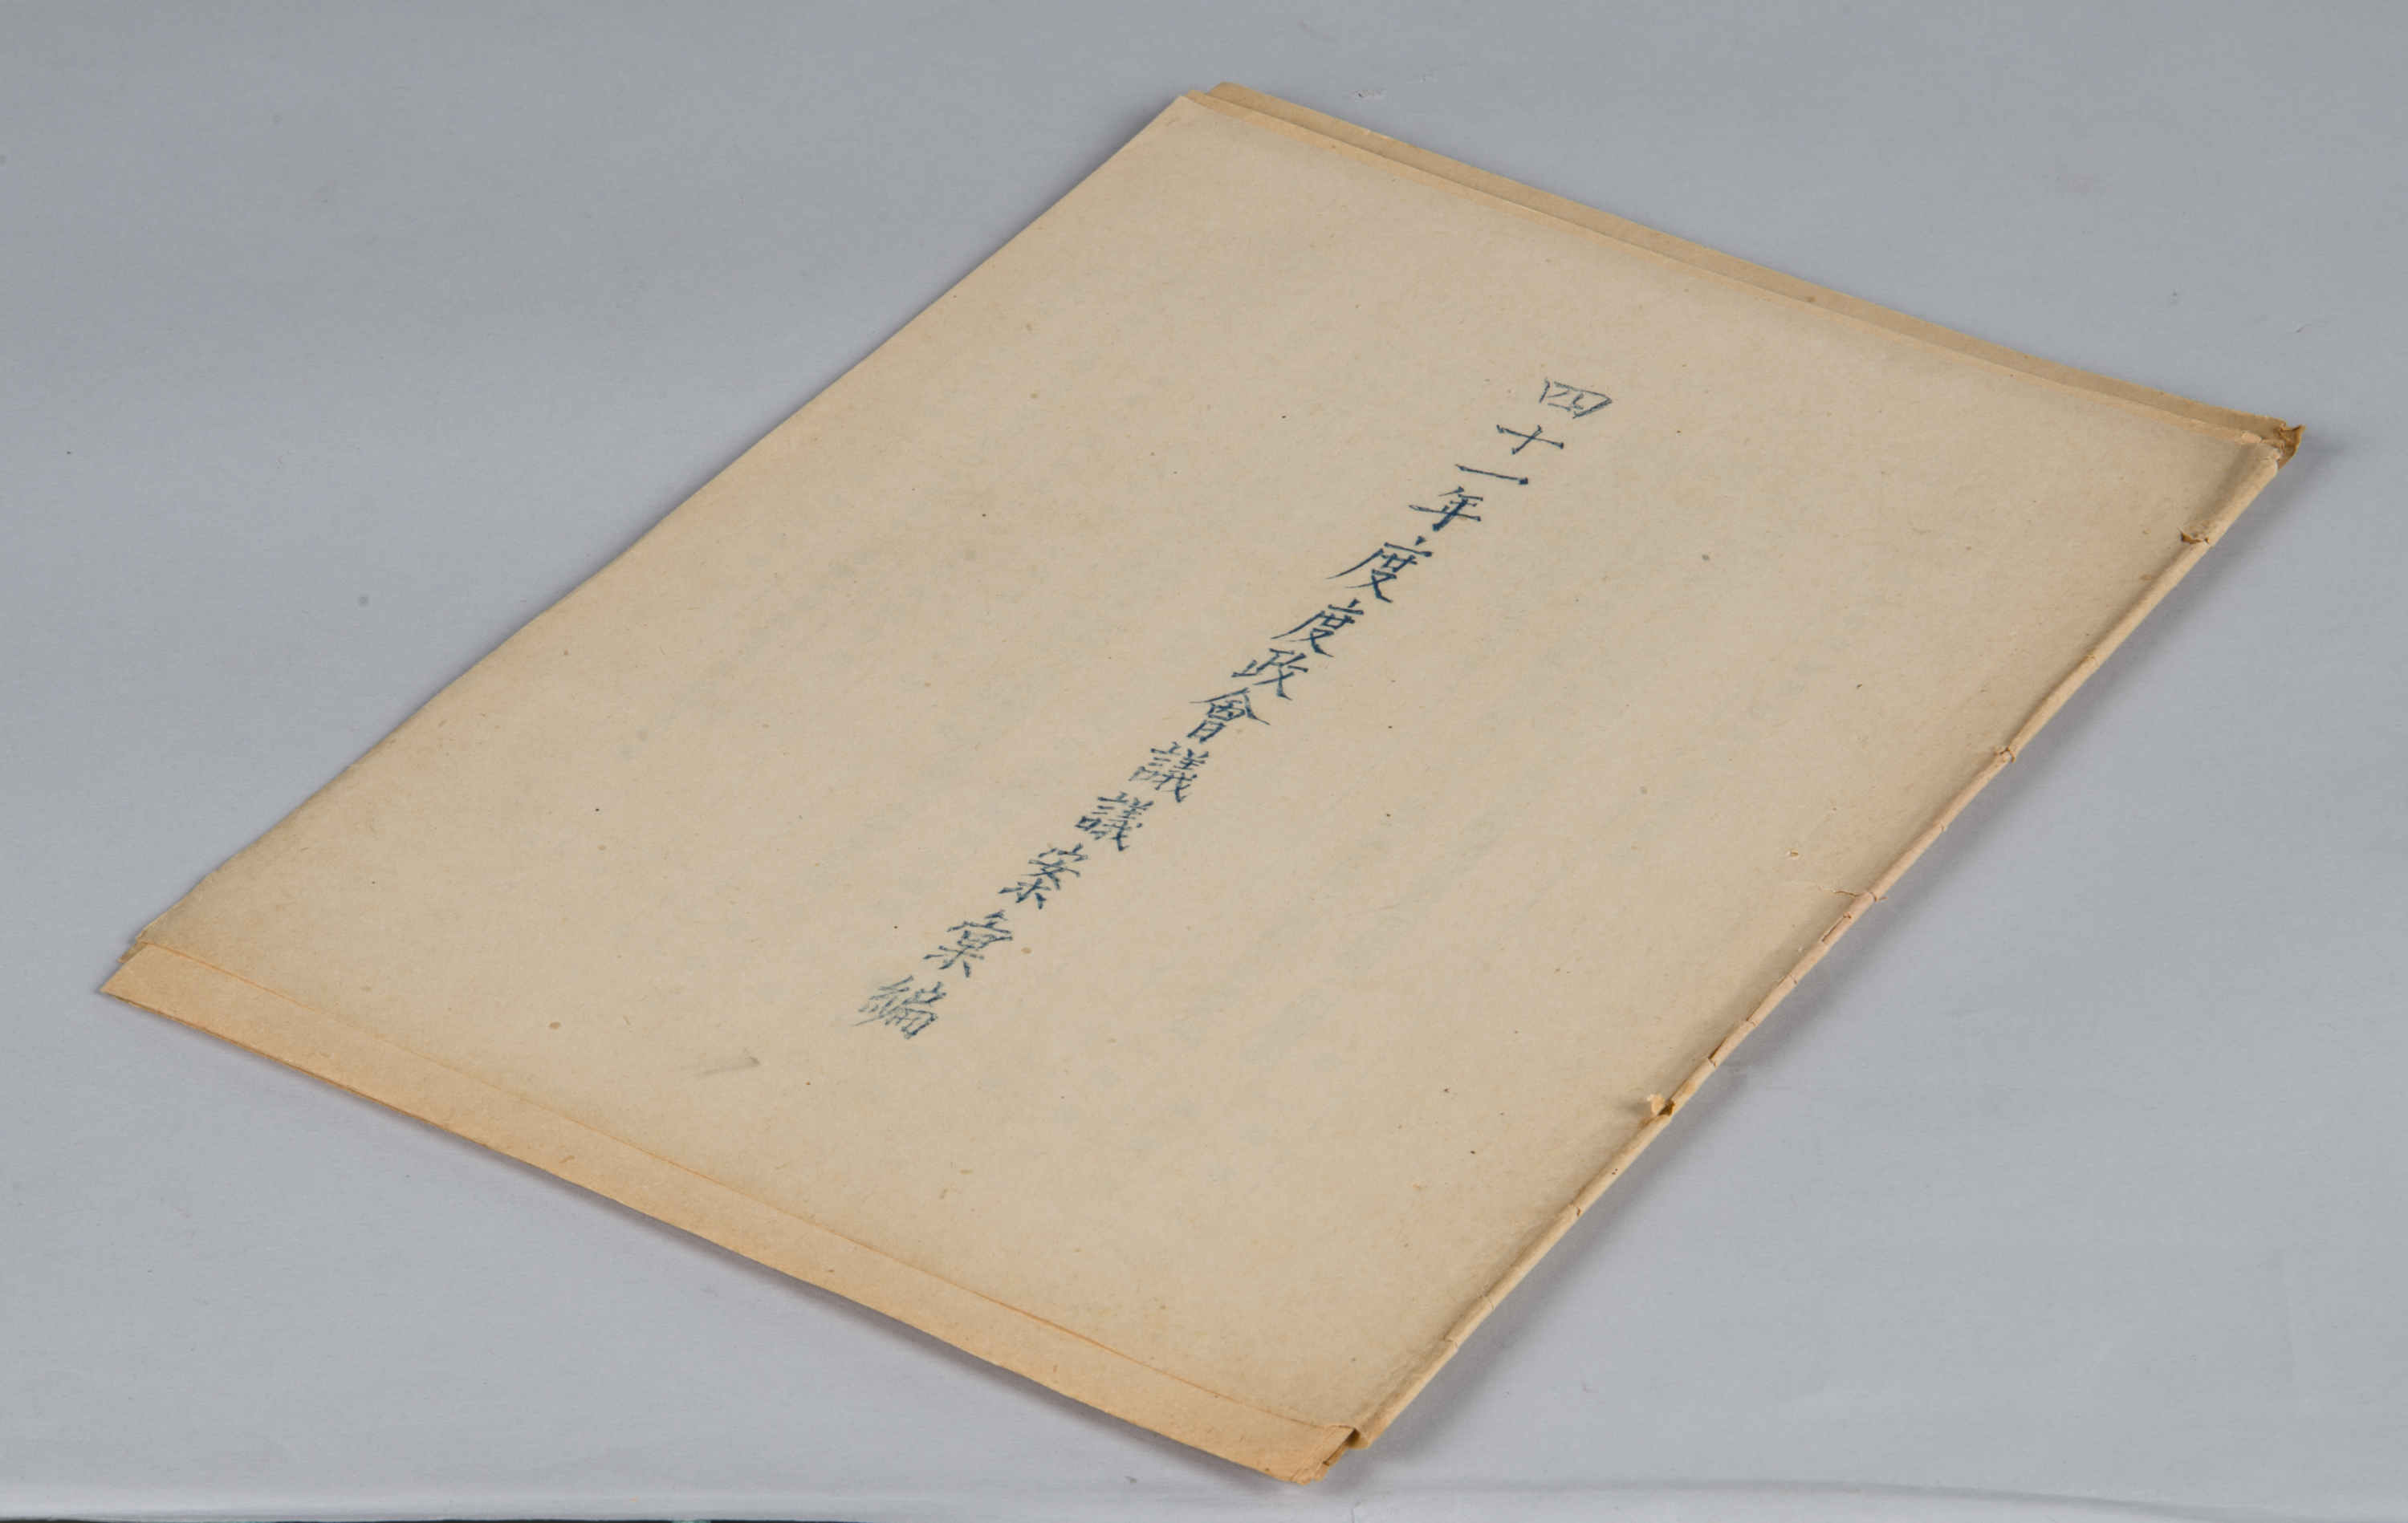 The agenda of the Metrological Administration Conference in 1952,Total 1 pictures